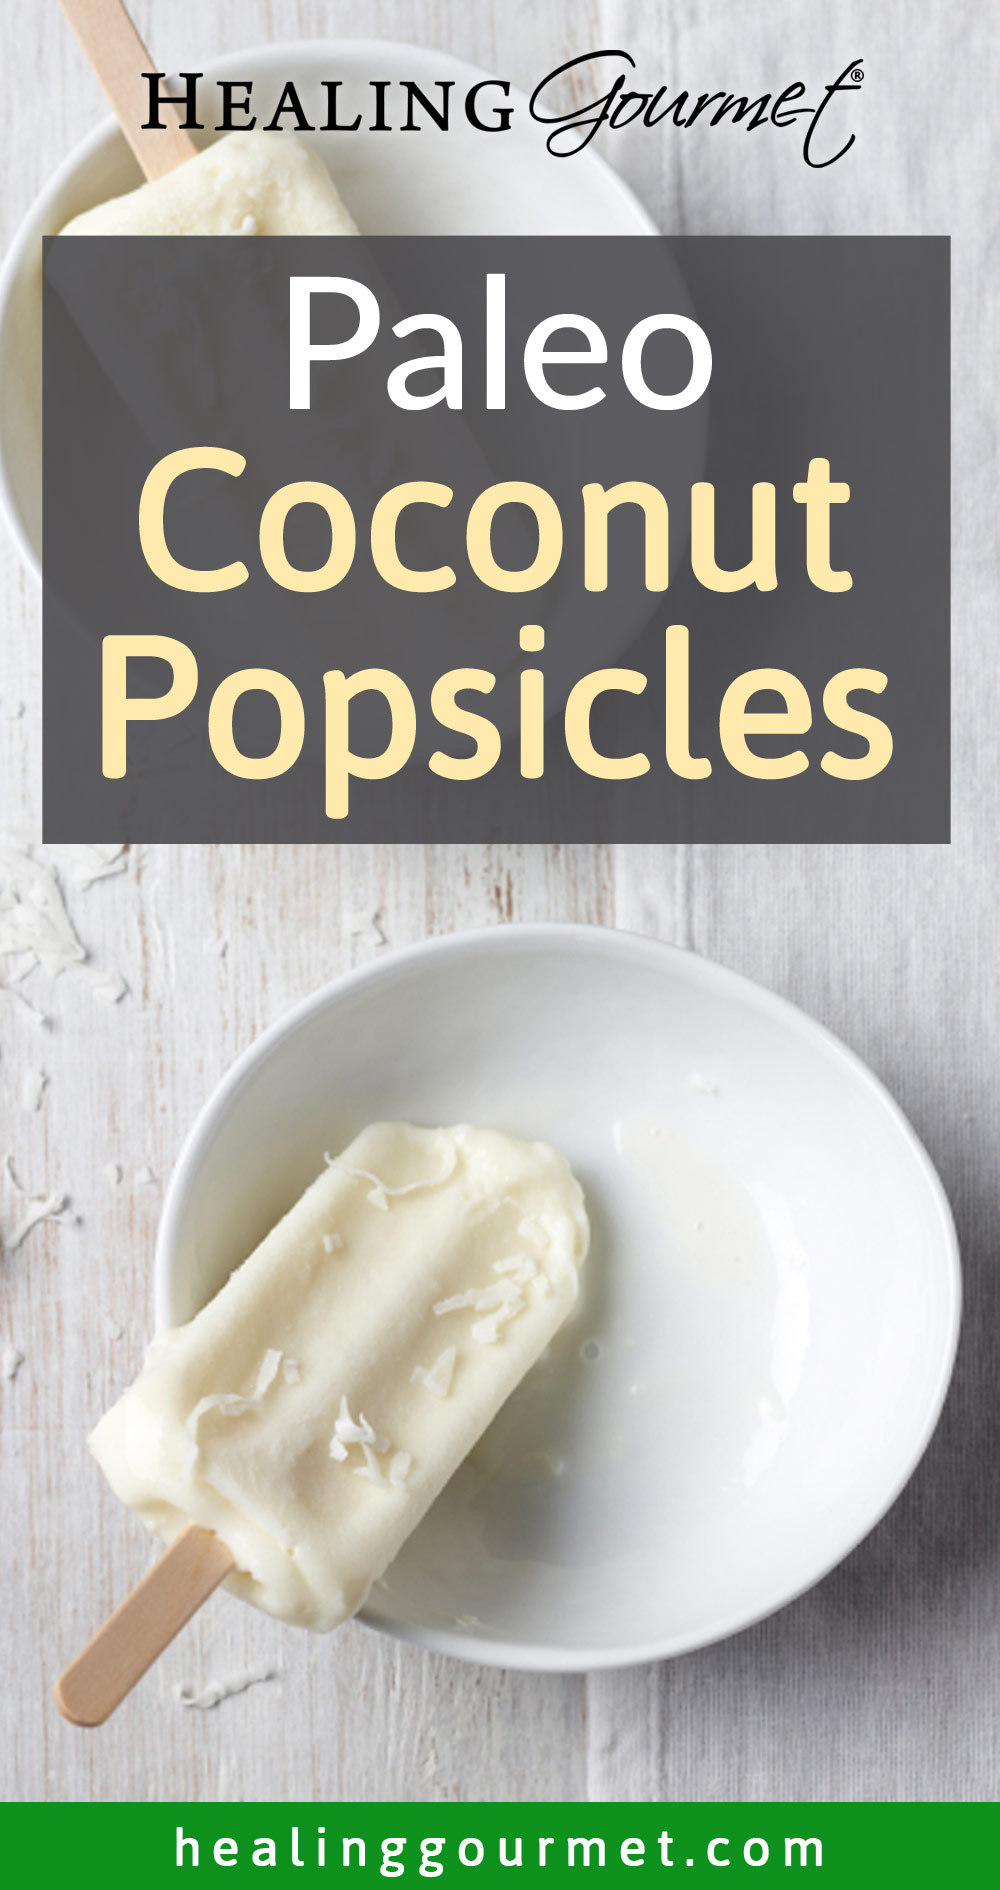 How to Make Coconut Popsicles (Paleo + Sugar Free!)